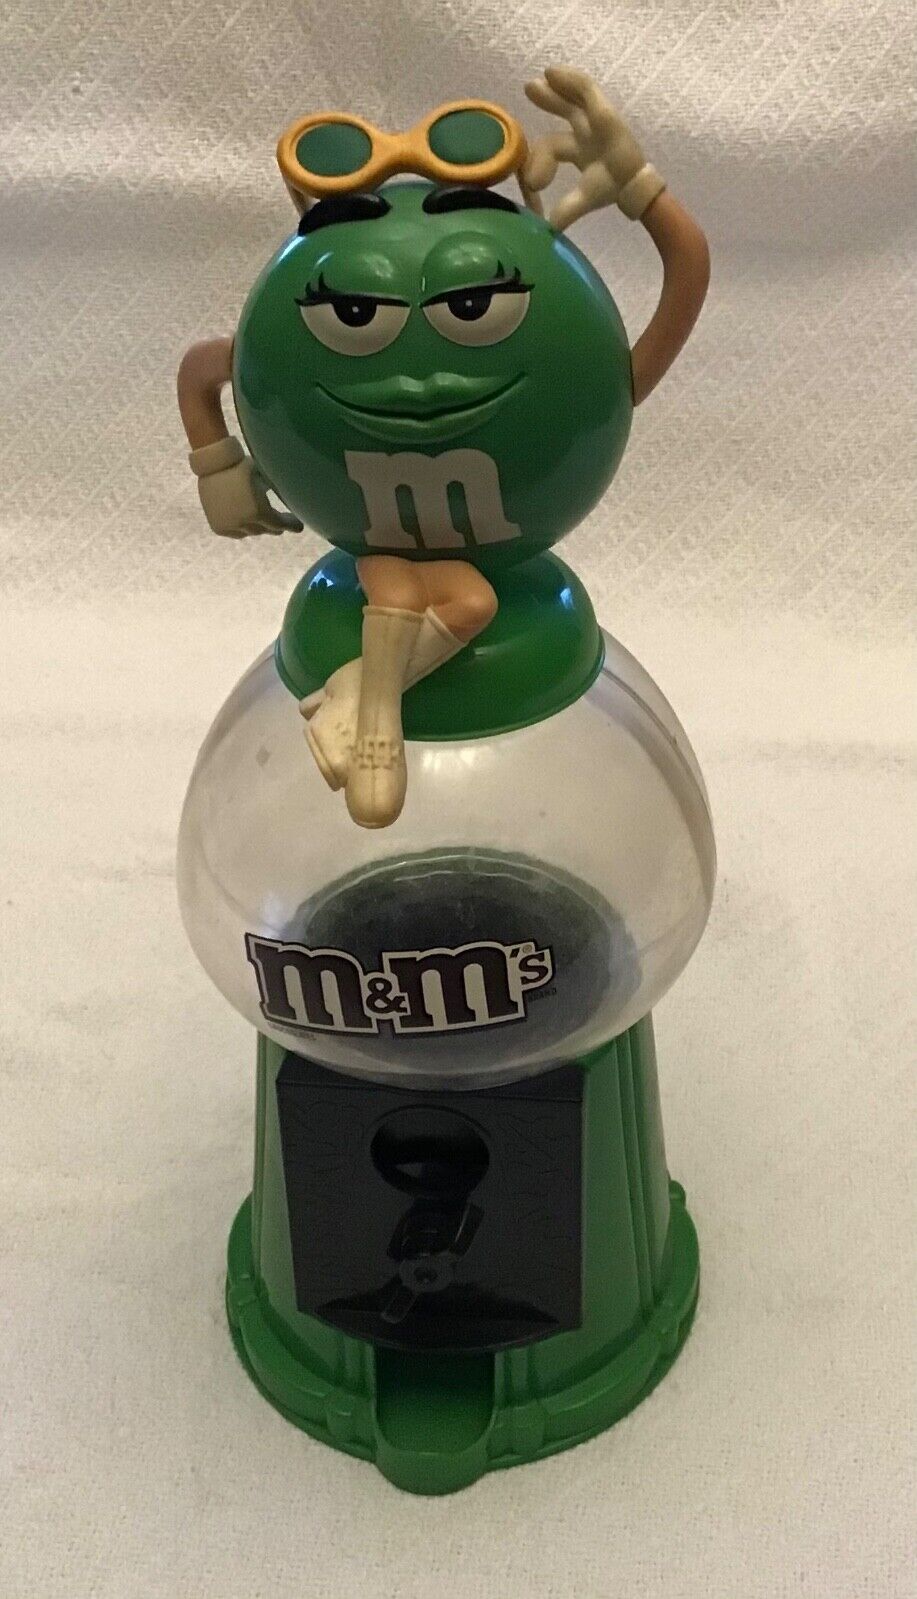 M&M green lady plastic gum ball machine 12” tall made by Mars in 2006